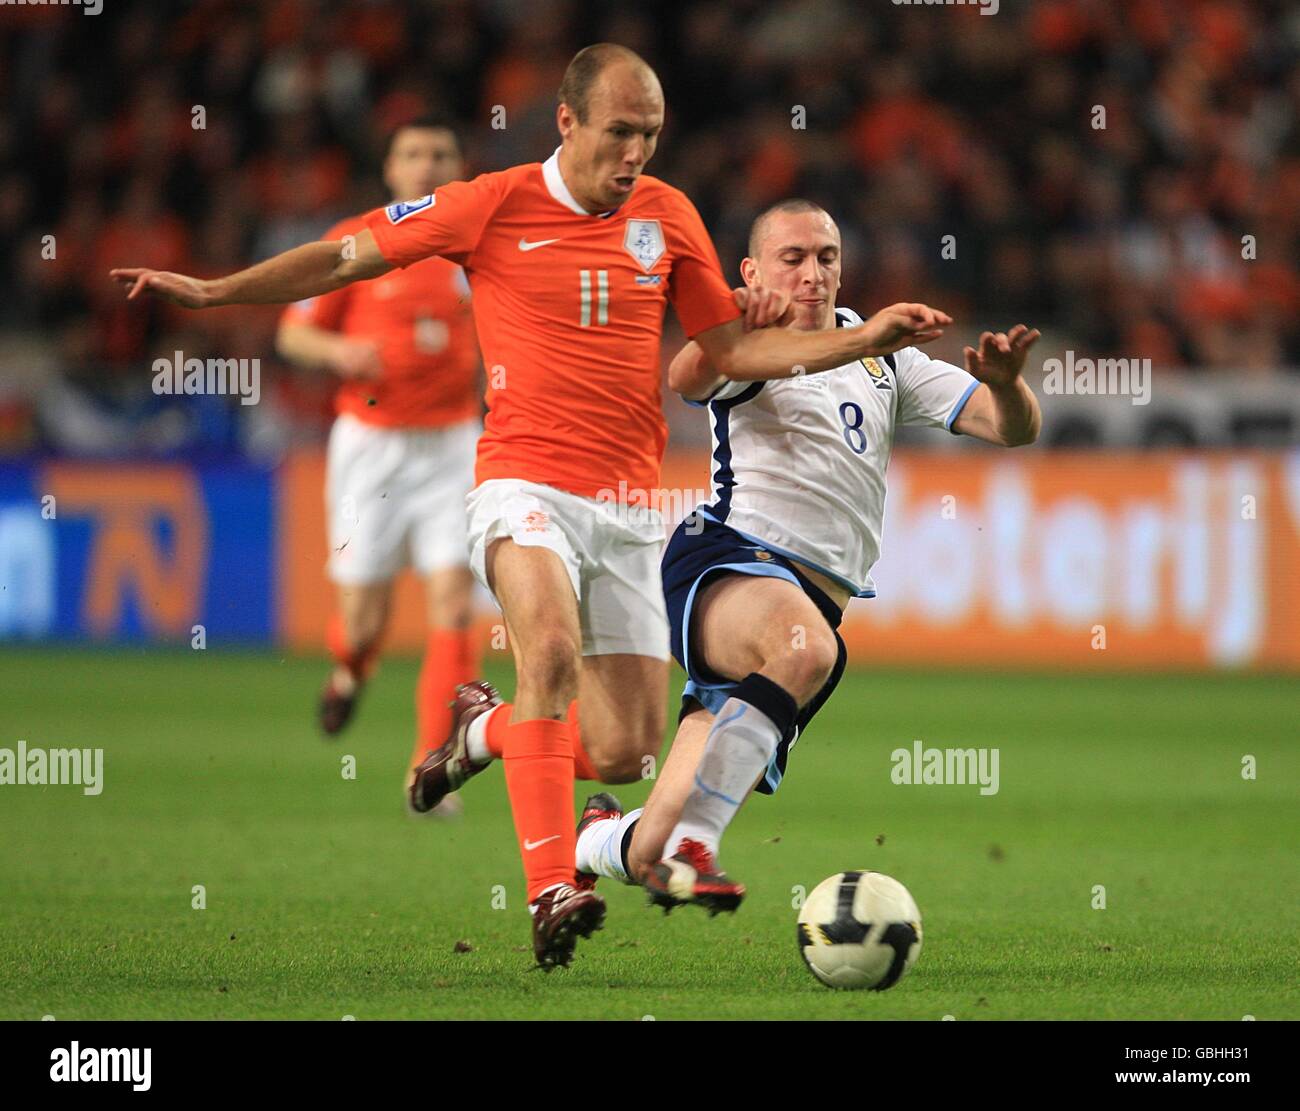 Soccer - FIFA World Cup 2010 - Qualifying Round - Group Nine - Holland v Scotland - Amsterdam ArenA. Holland's Arjen Robben (left) and Scotland's Scott Brown battle for the ball Stock Photo